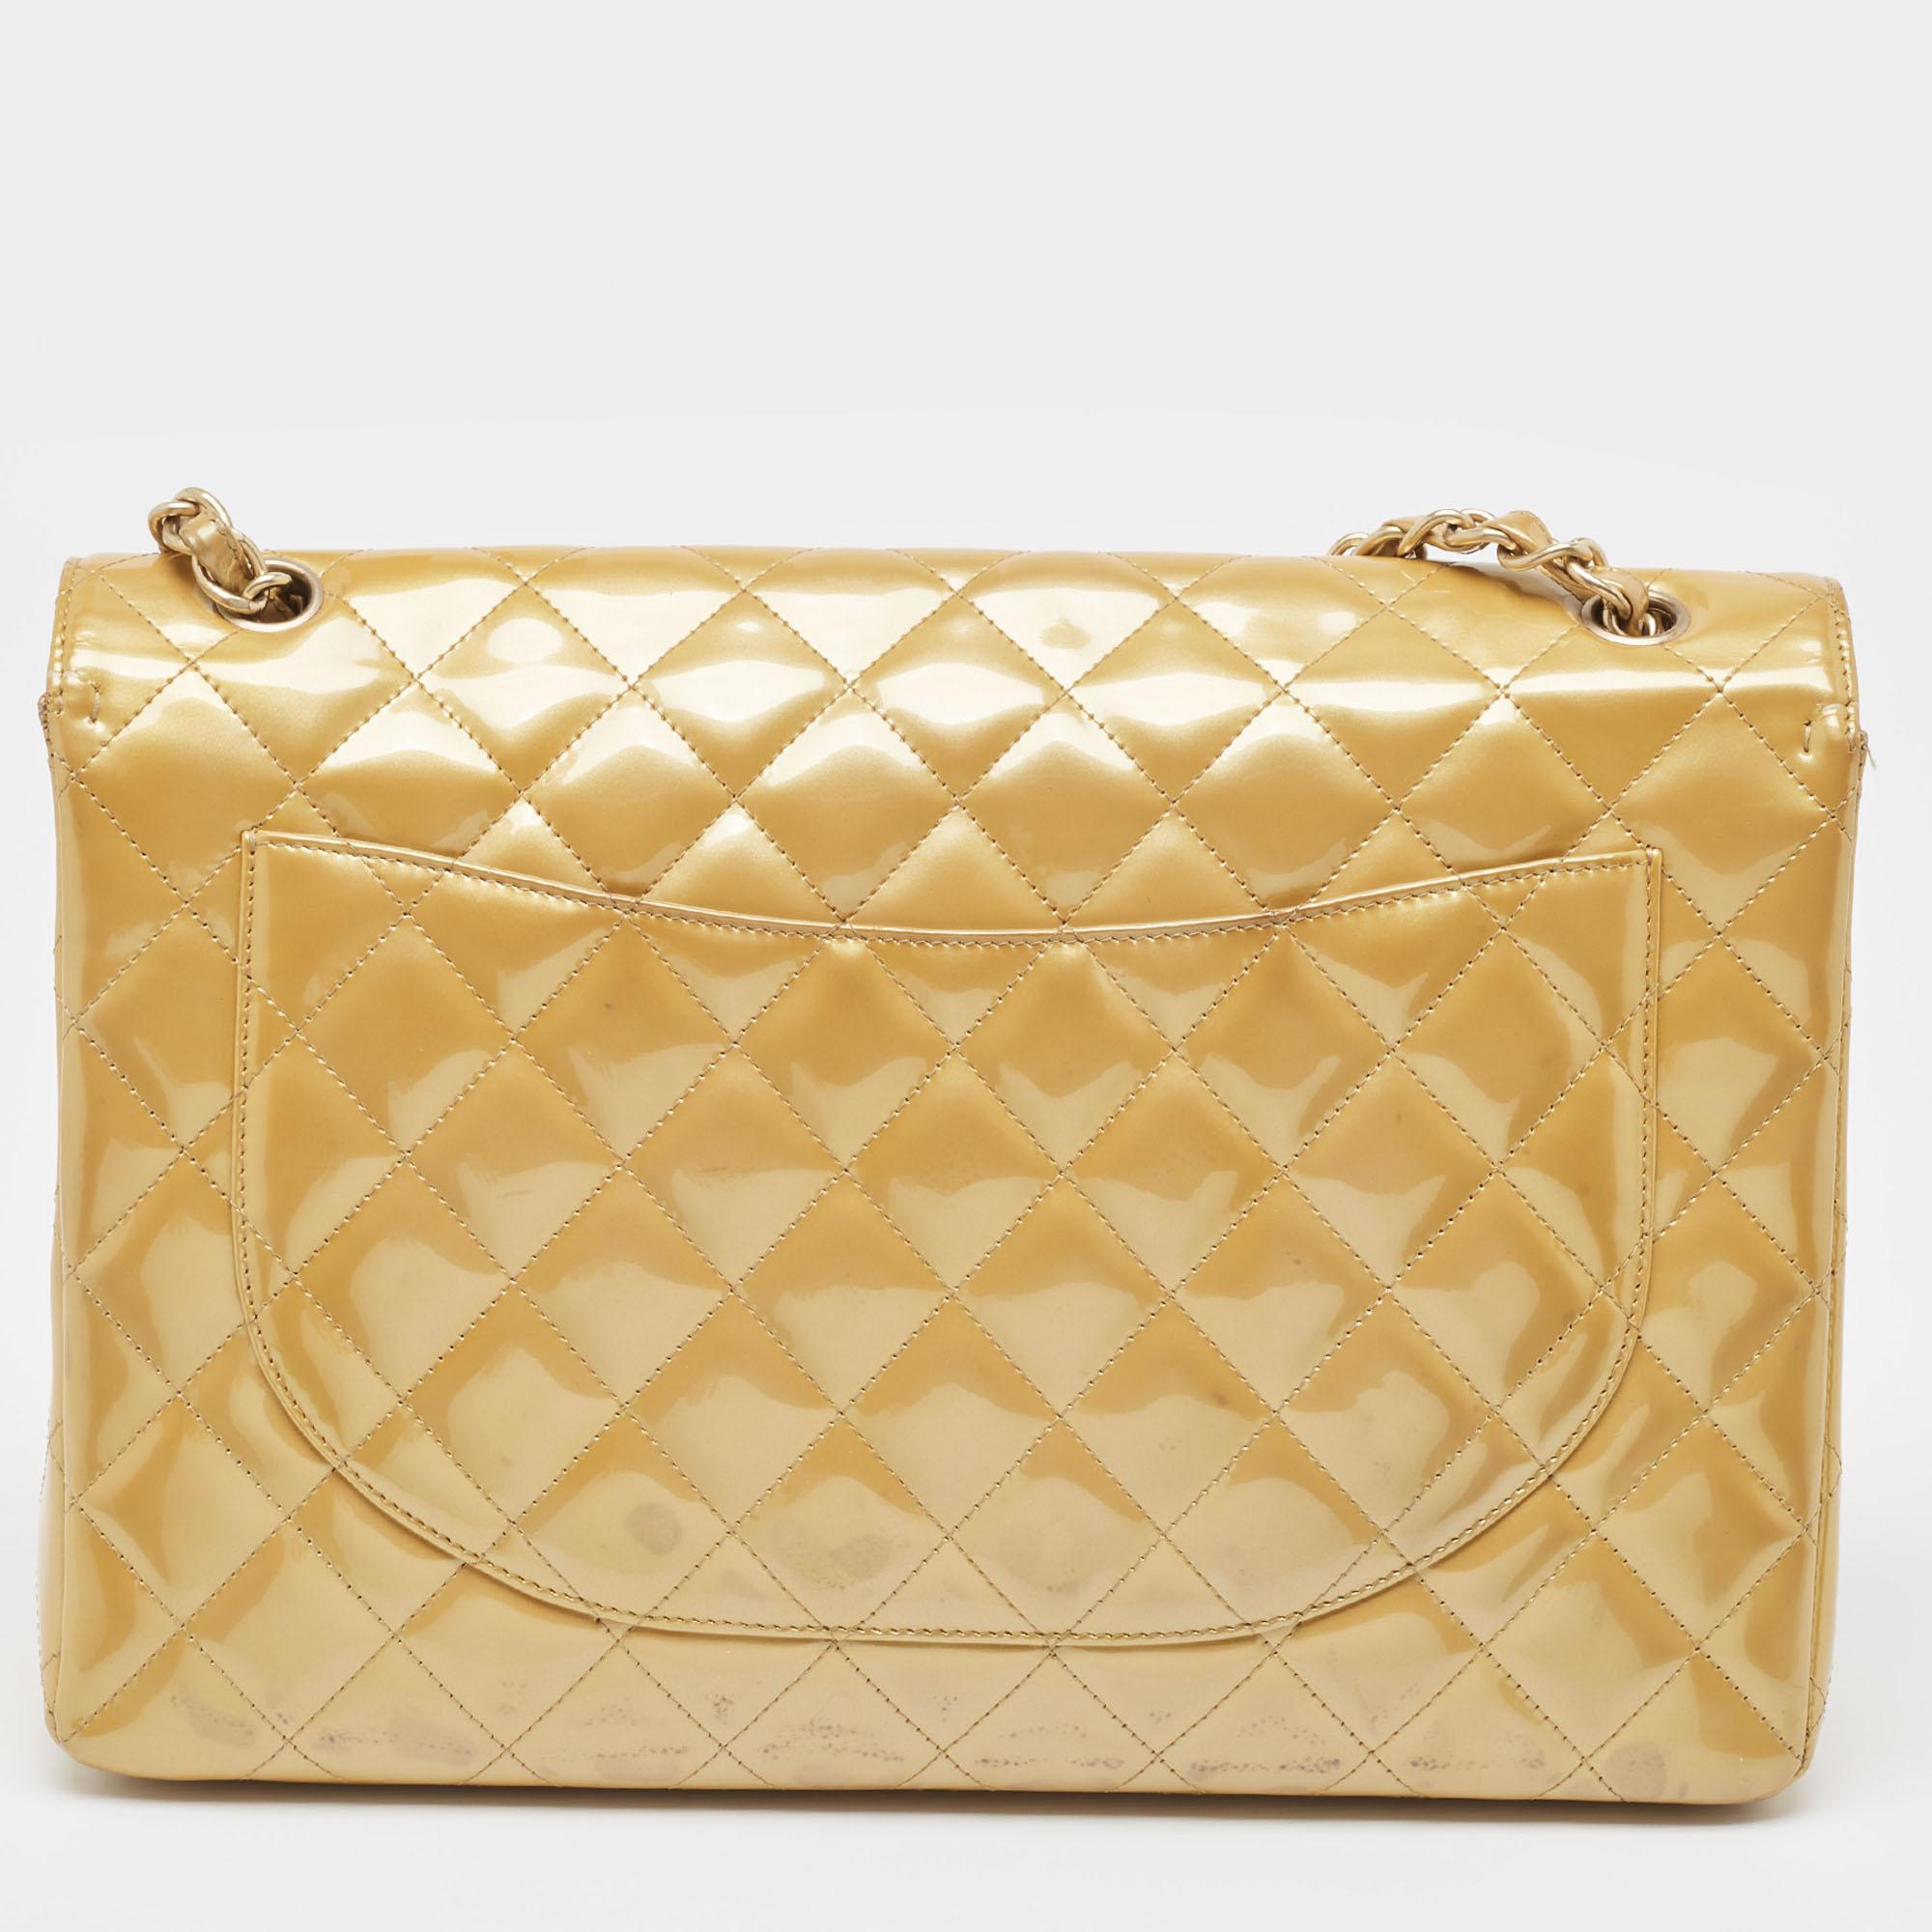 Women's Chanel Cream Quilted Patent Leather Maxi Classic Single Flap Bag For Sale